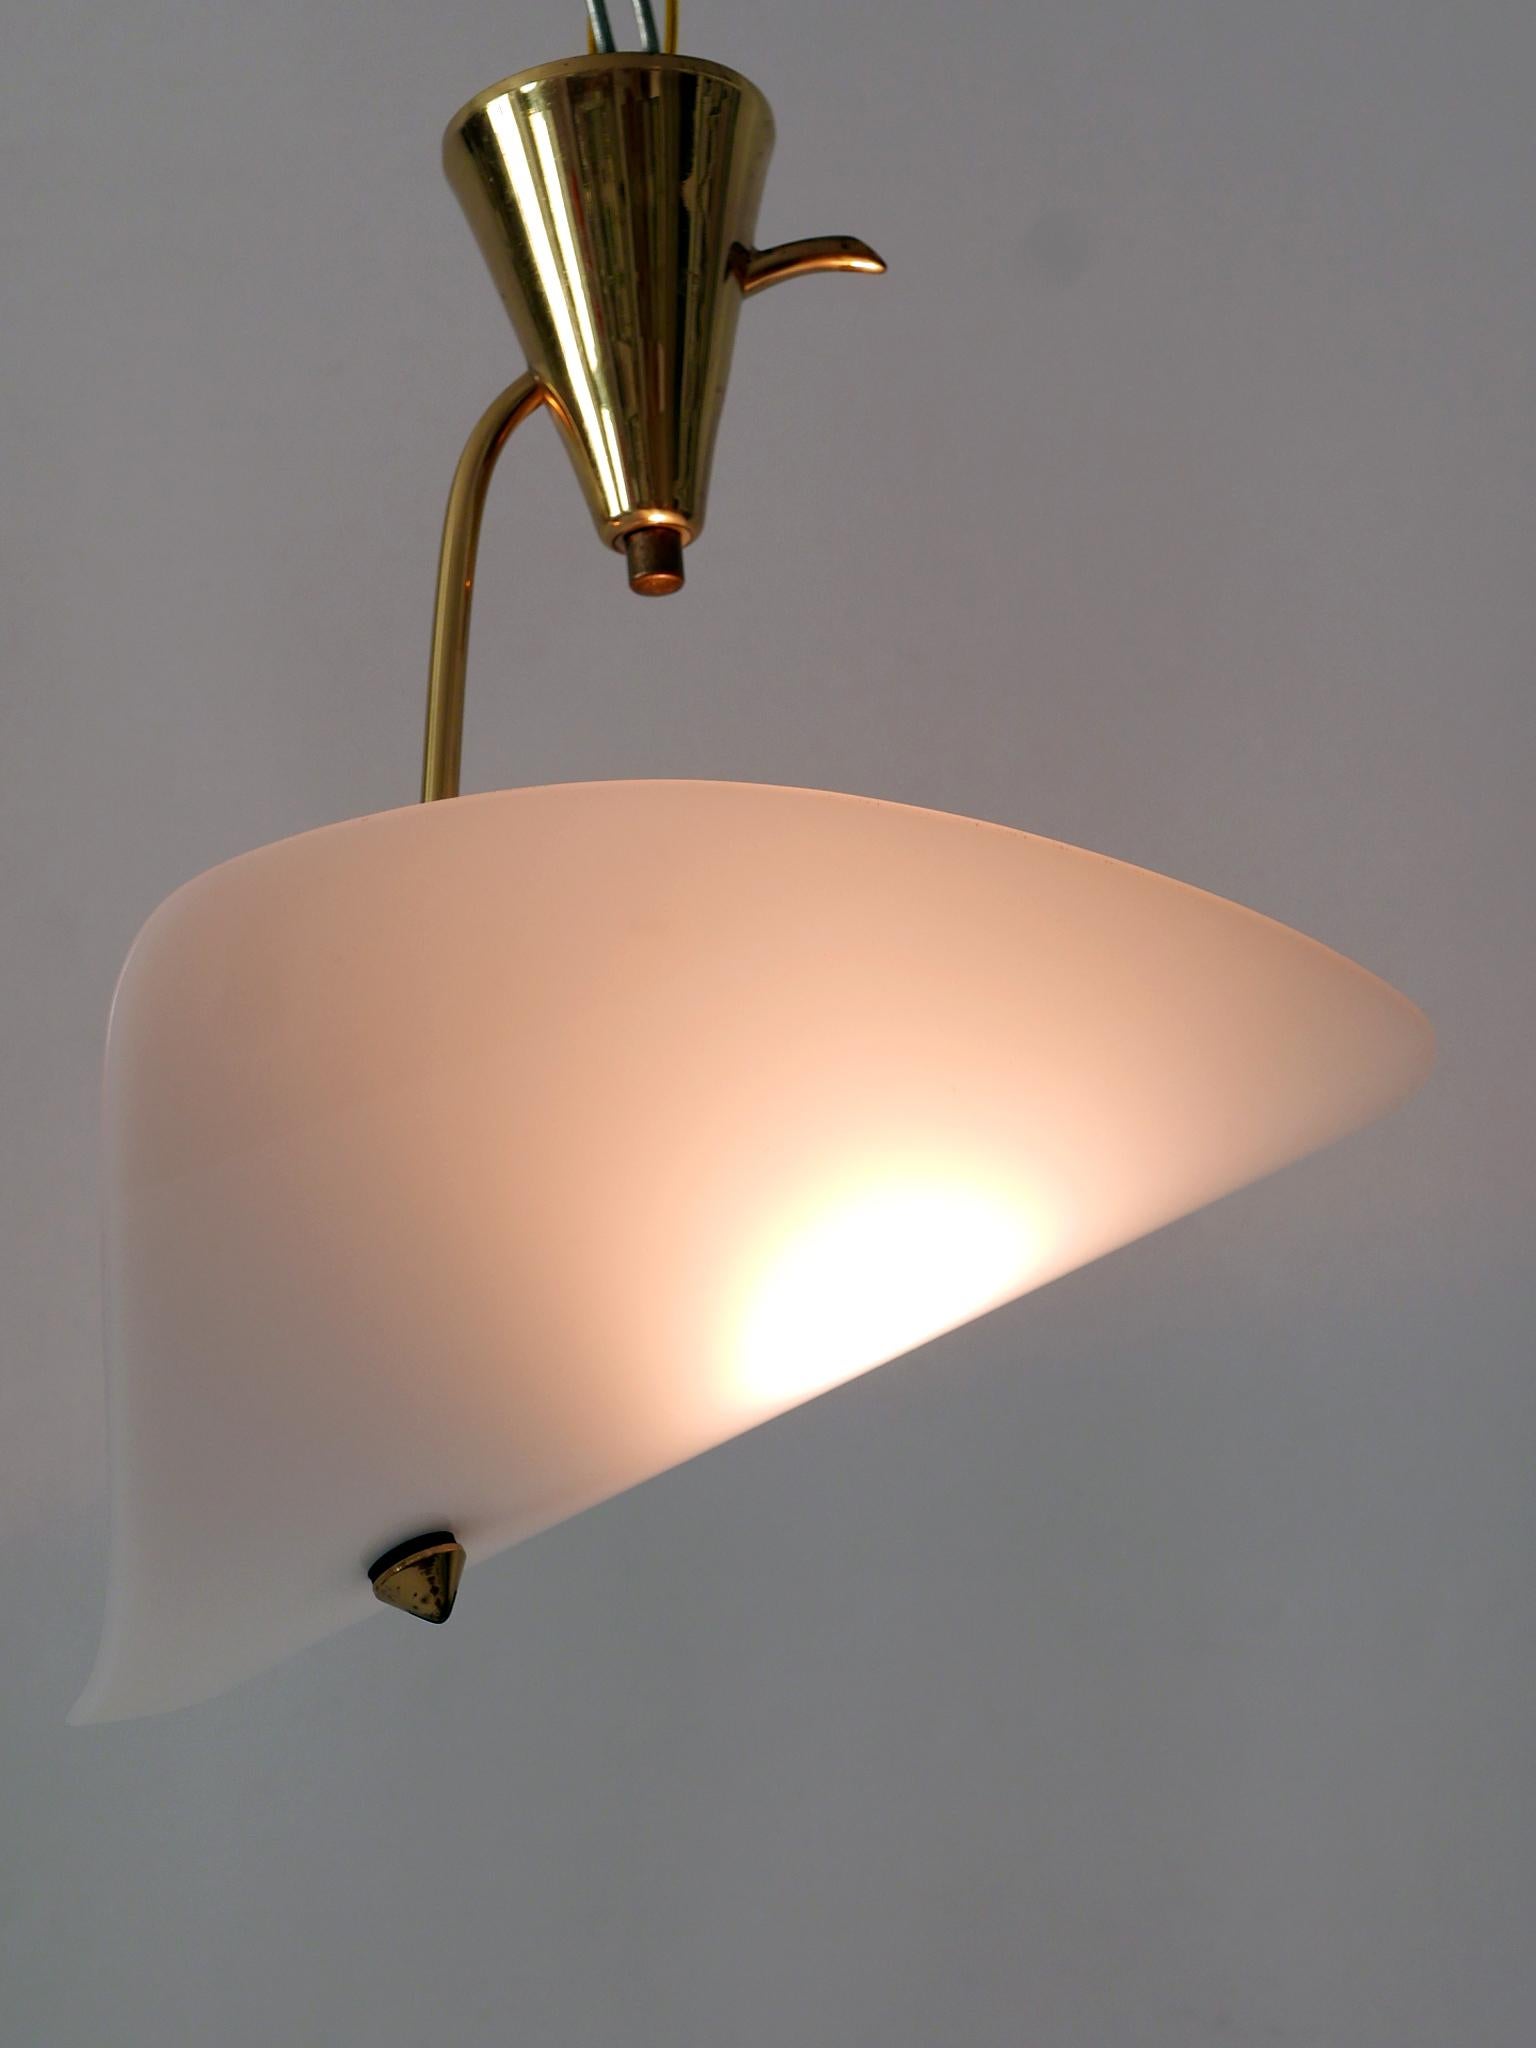 Mid-20th Century Extremely Rare and Elegant Lucite & Brass Ceiling Lamp Germany 1960s For Sale